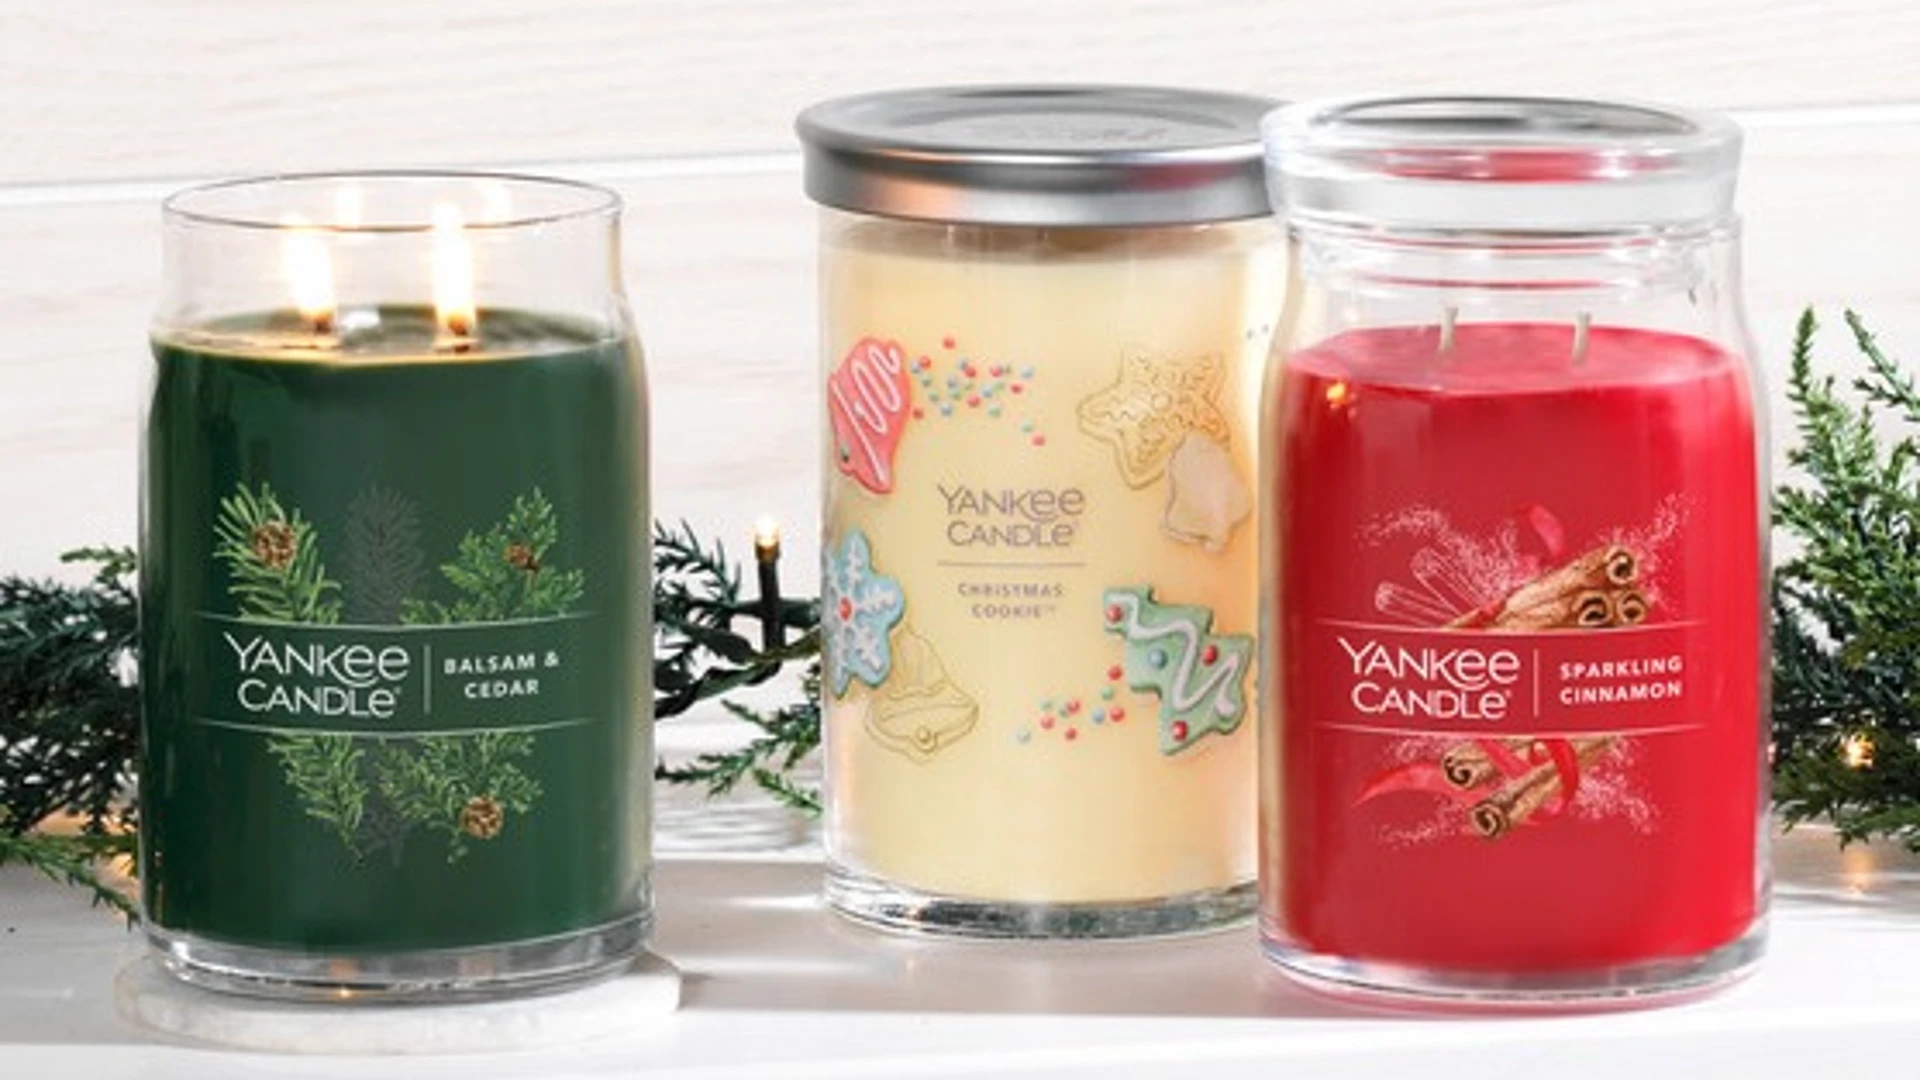 Yankee Candle Coupons